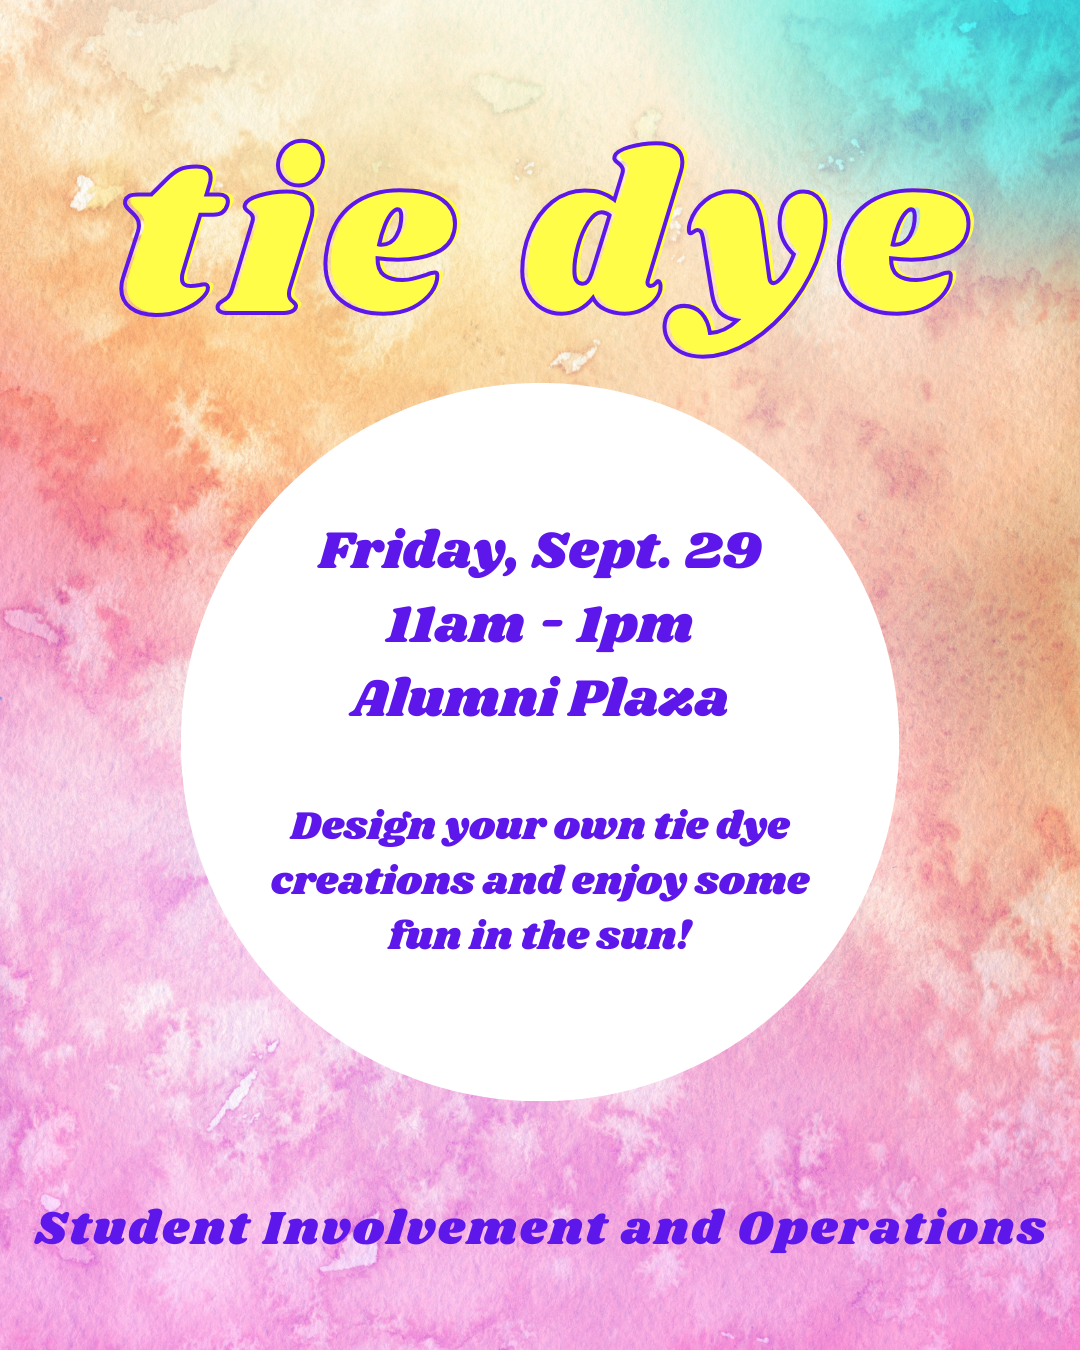 Tie Dye Event, Friday Sept. 29 11am -1pm Design your own tie dye creations and …